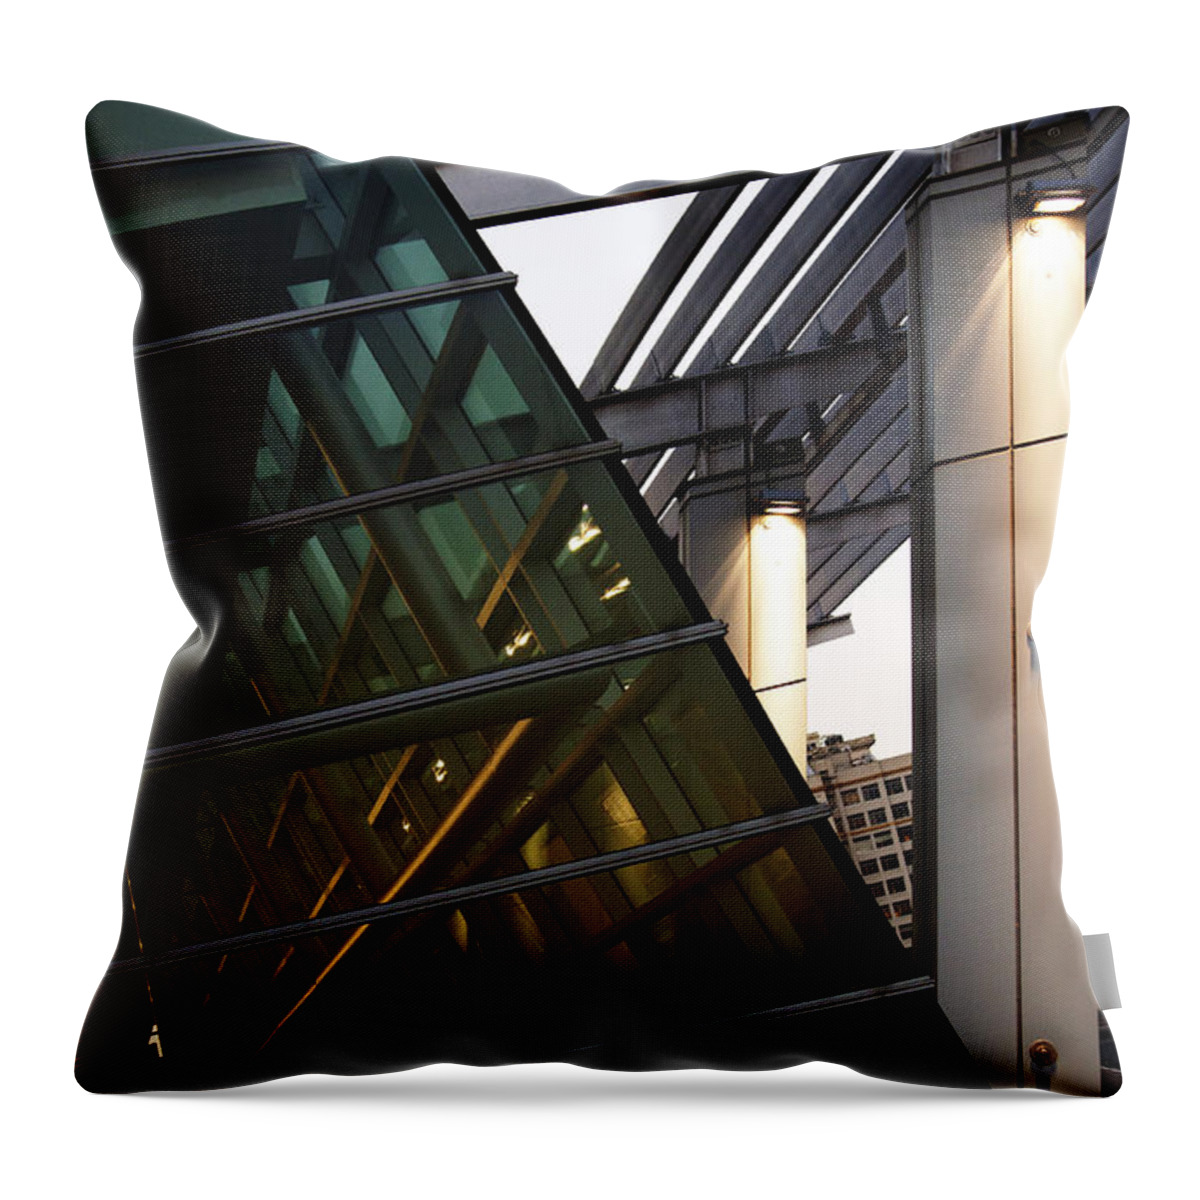 Tacoma Throw Pillow featuring the photograph Abstract by Edward Hawkins II